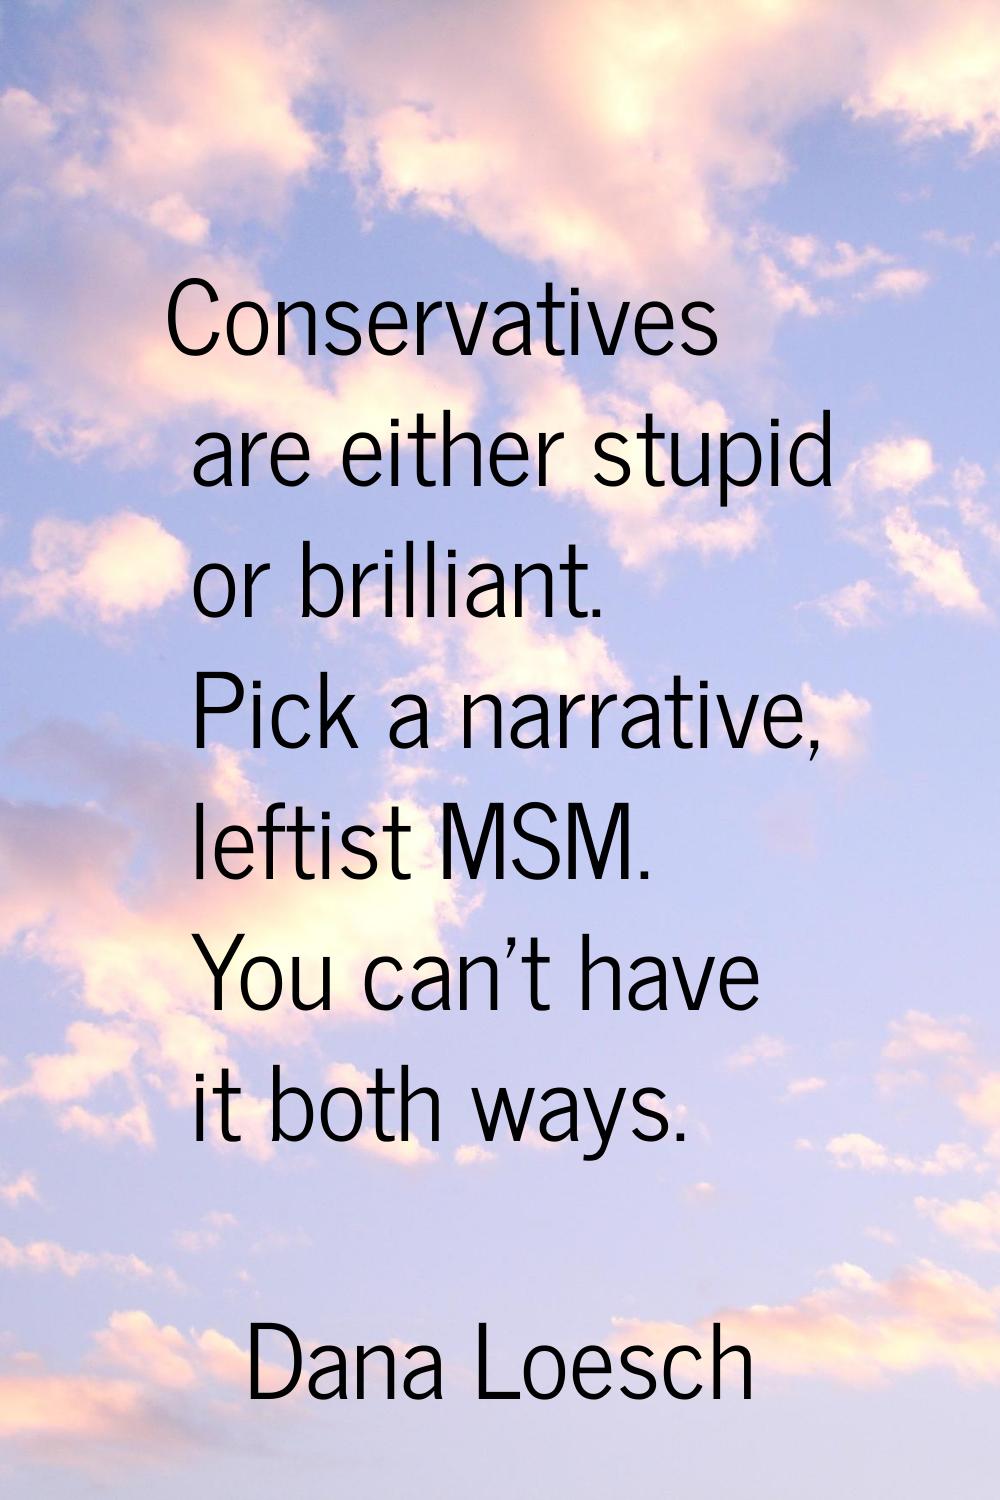 Conservatives are either stupid or brilliant. Pick a narrative, leftist MSM. You can't have it both